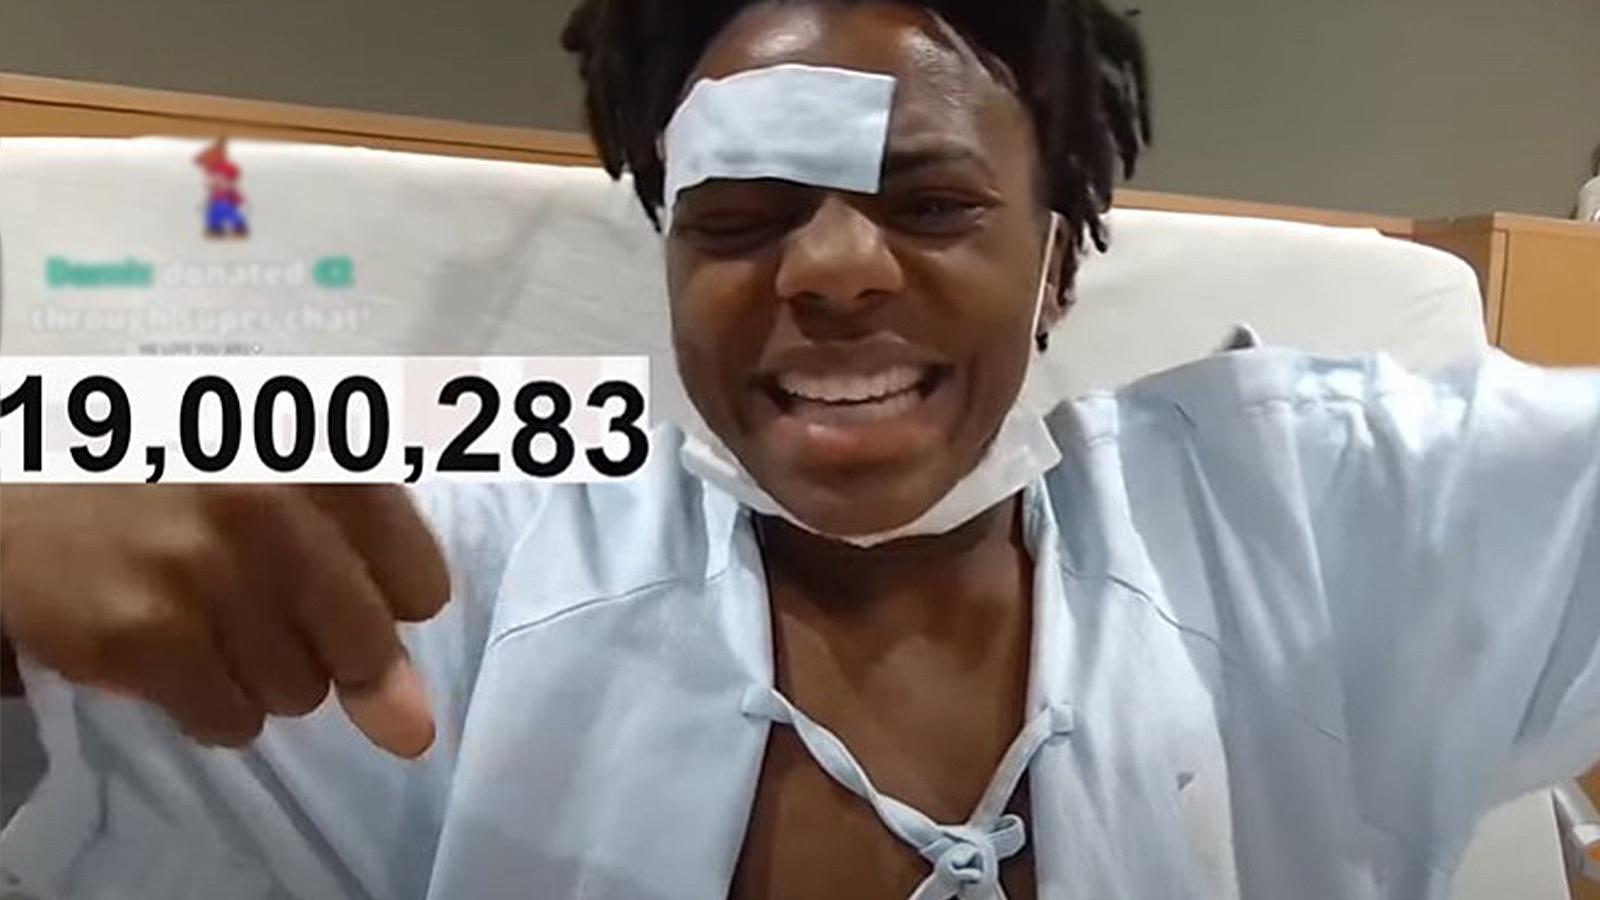 Why IShowSpeed is in hospital #fyp #ishowspeed #speed #hospital #tokyo, ksi reacts to speed